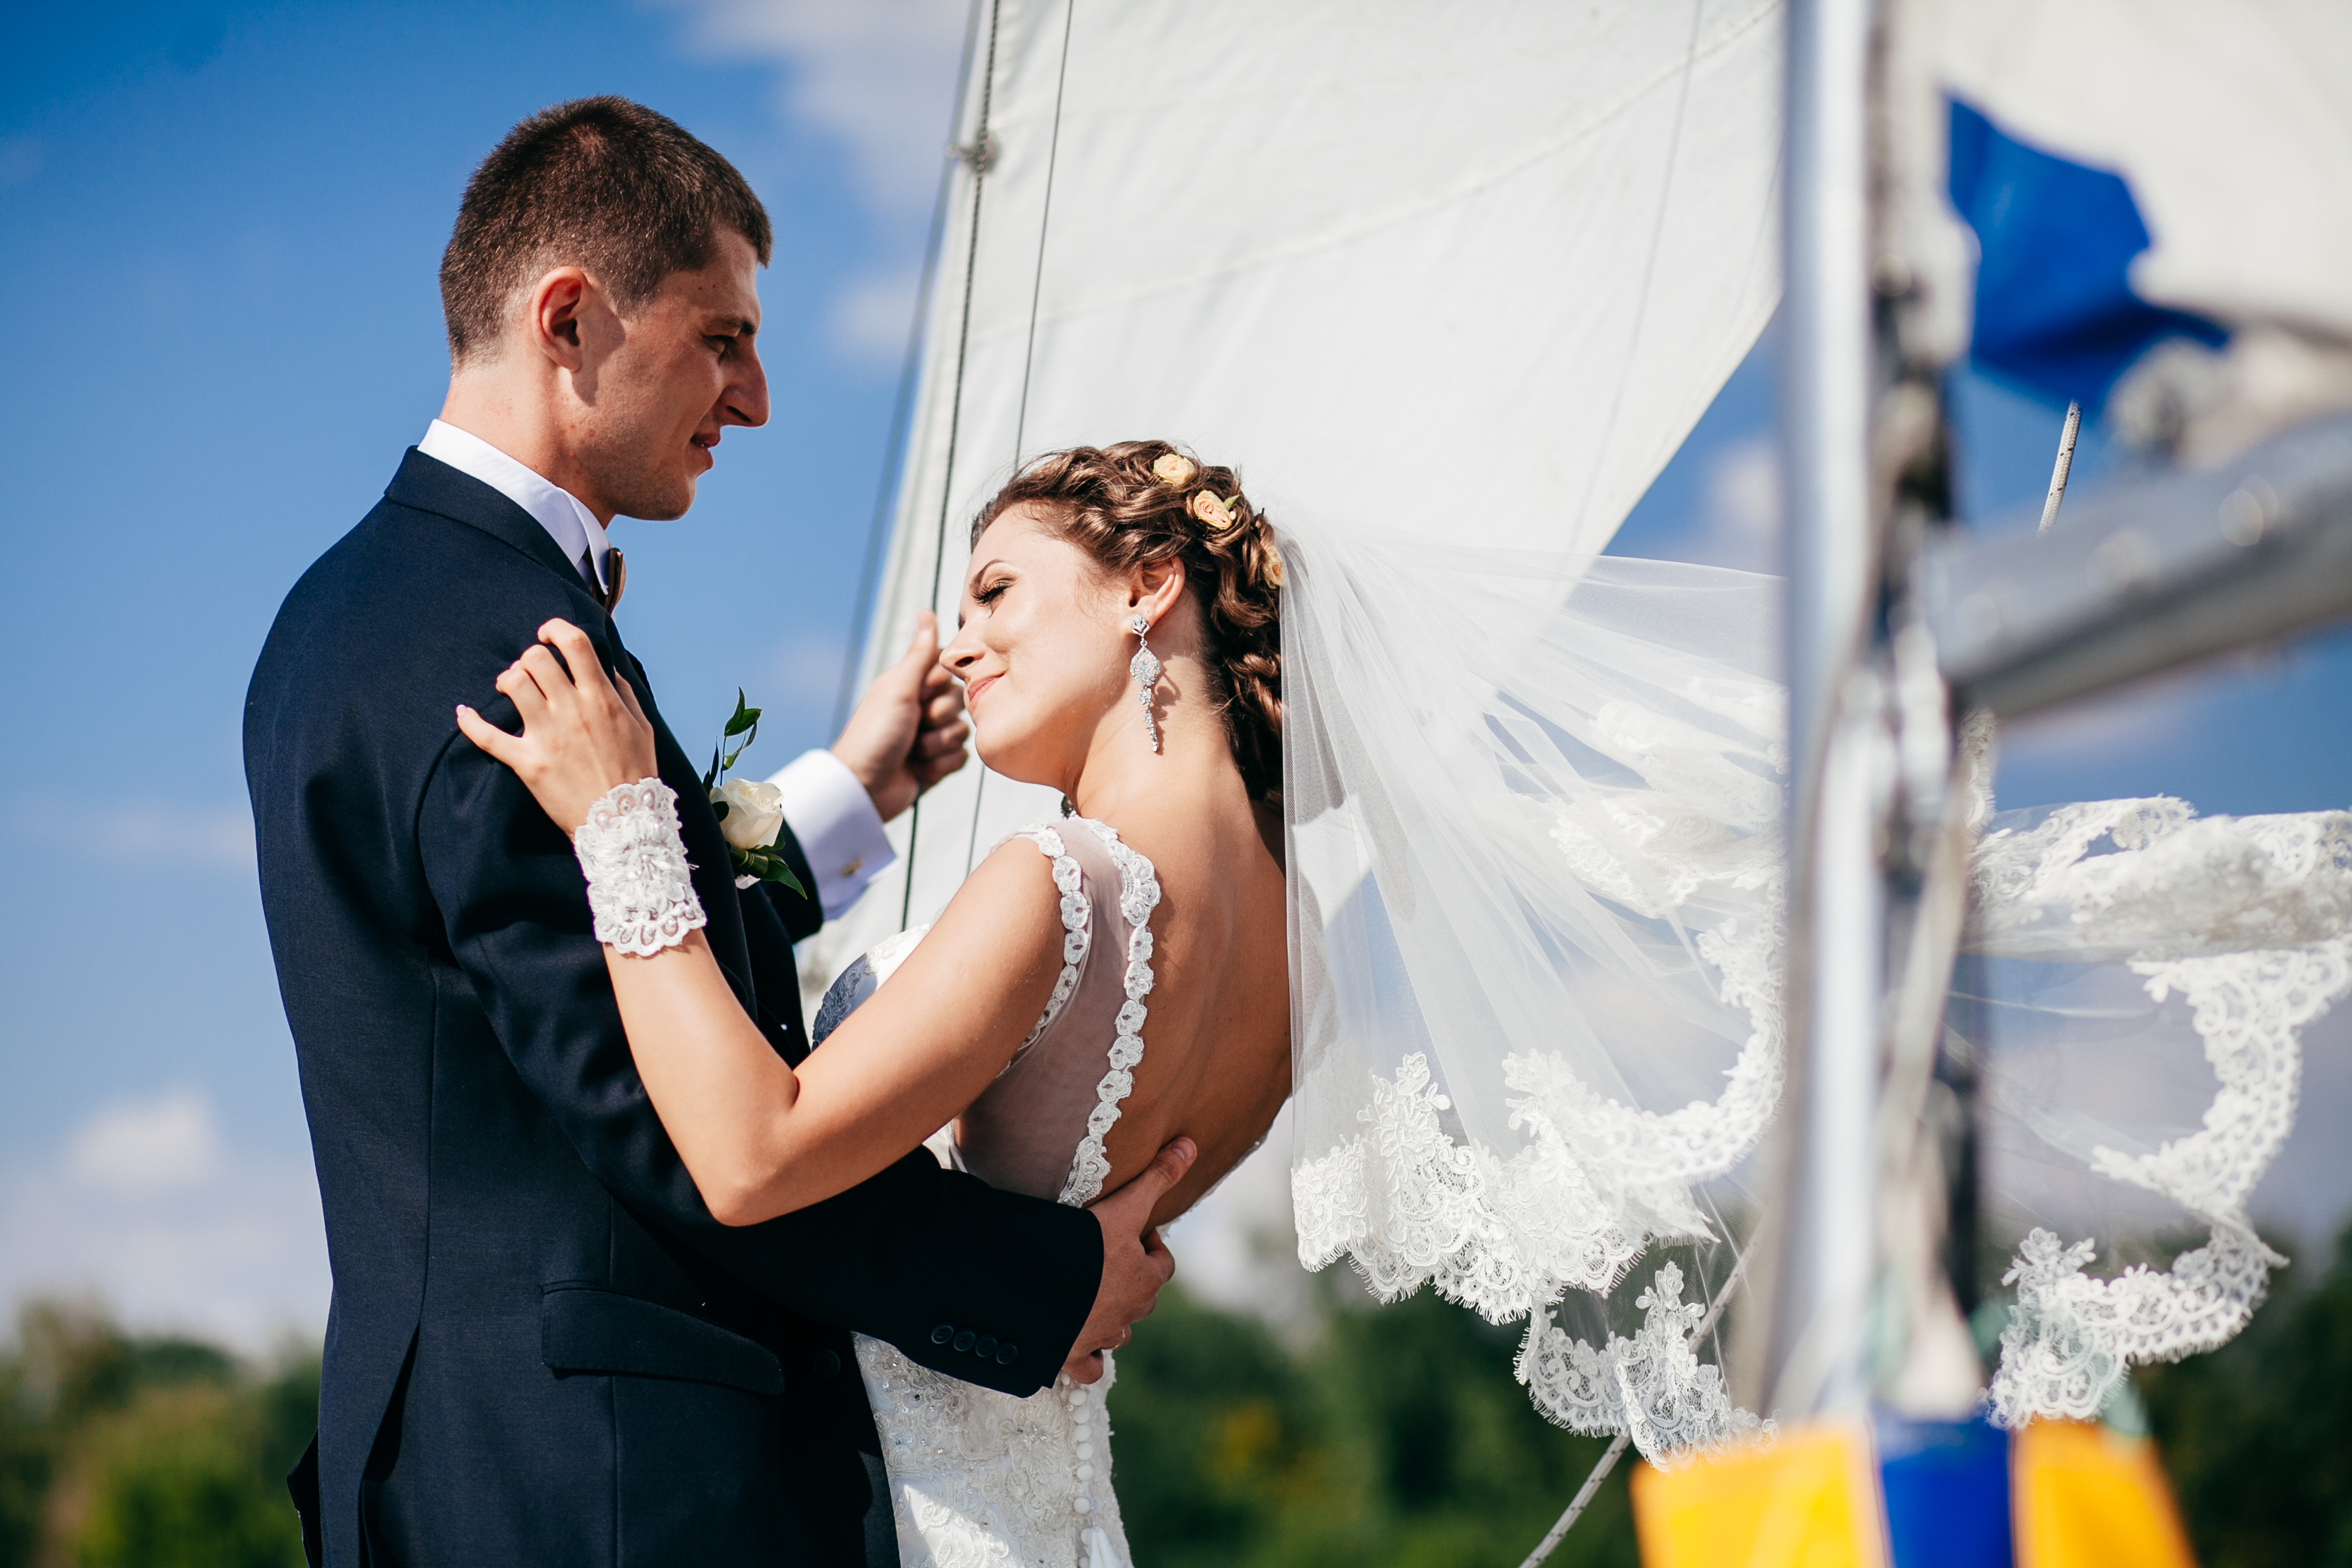 Things You Need To Know About Boat Weddings